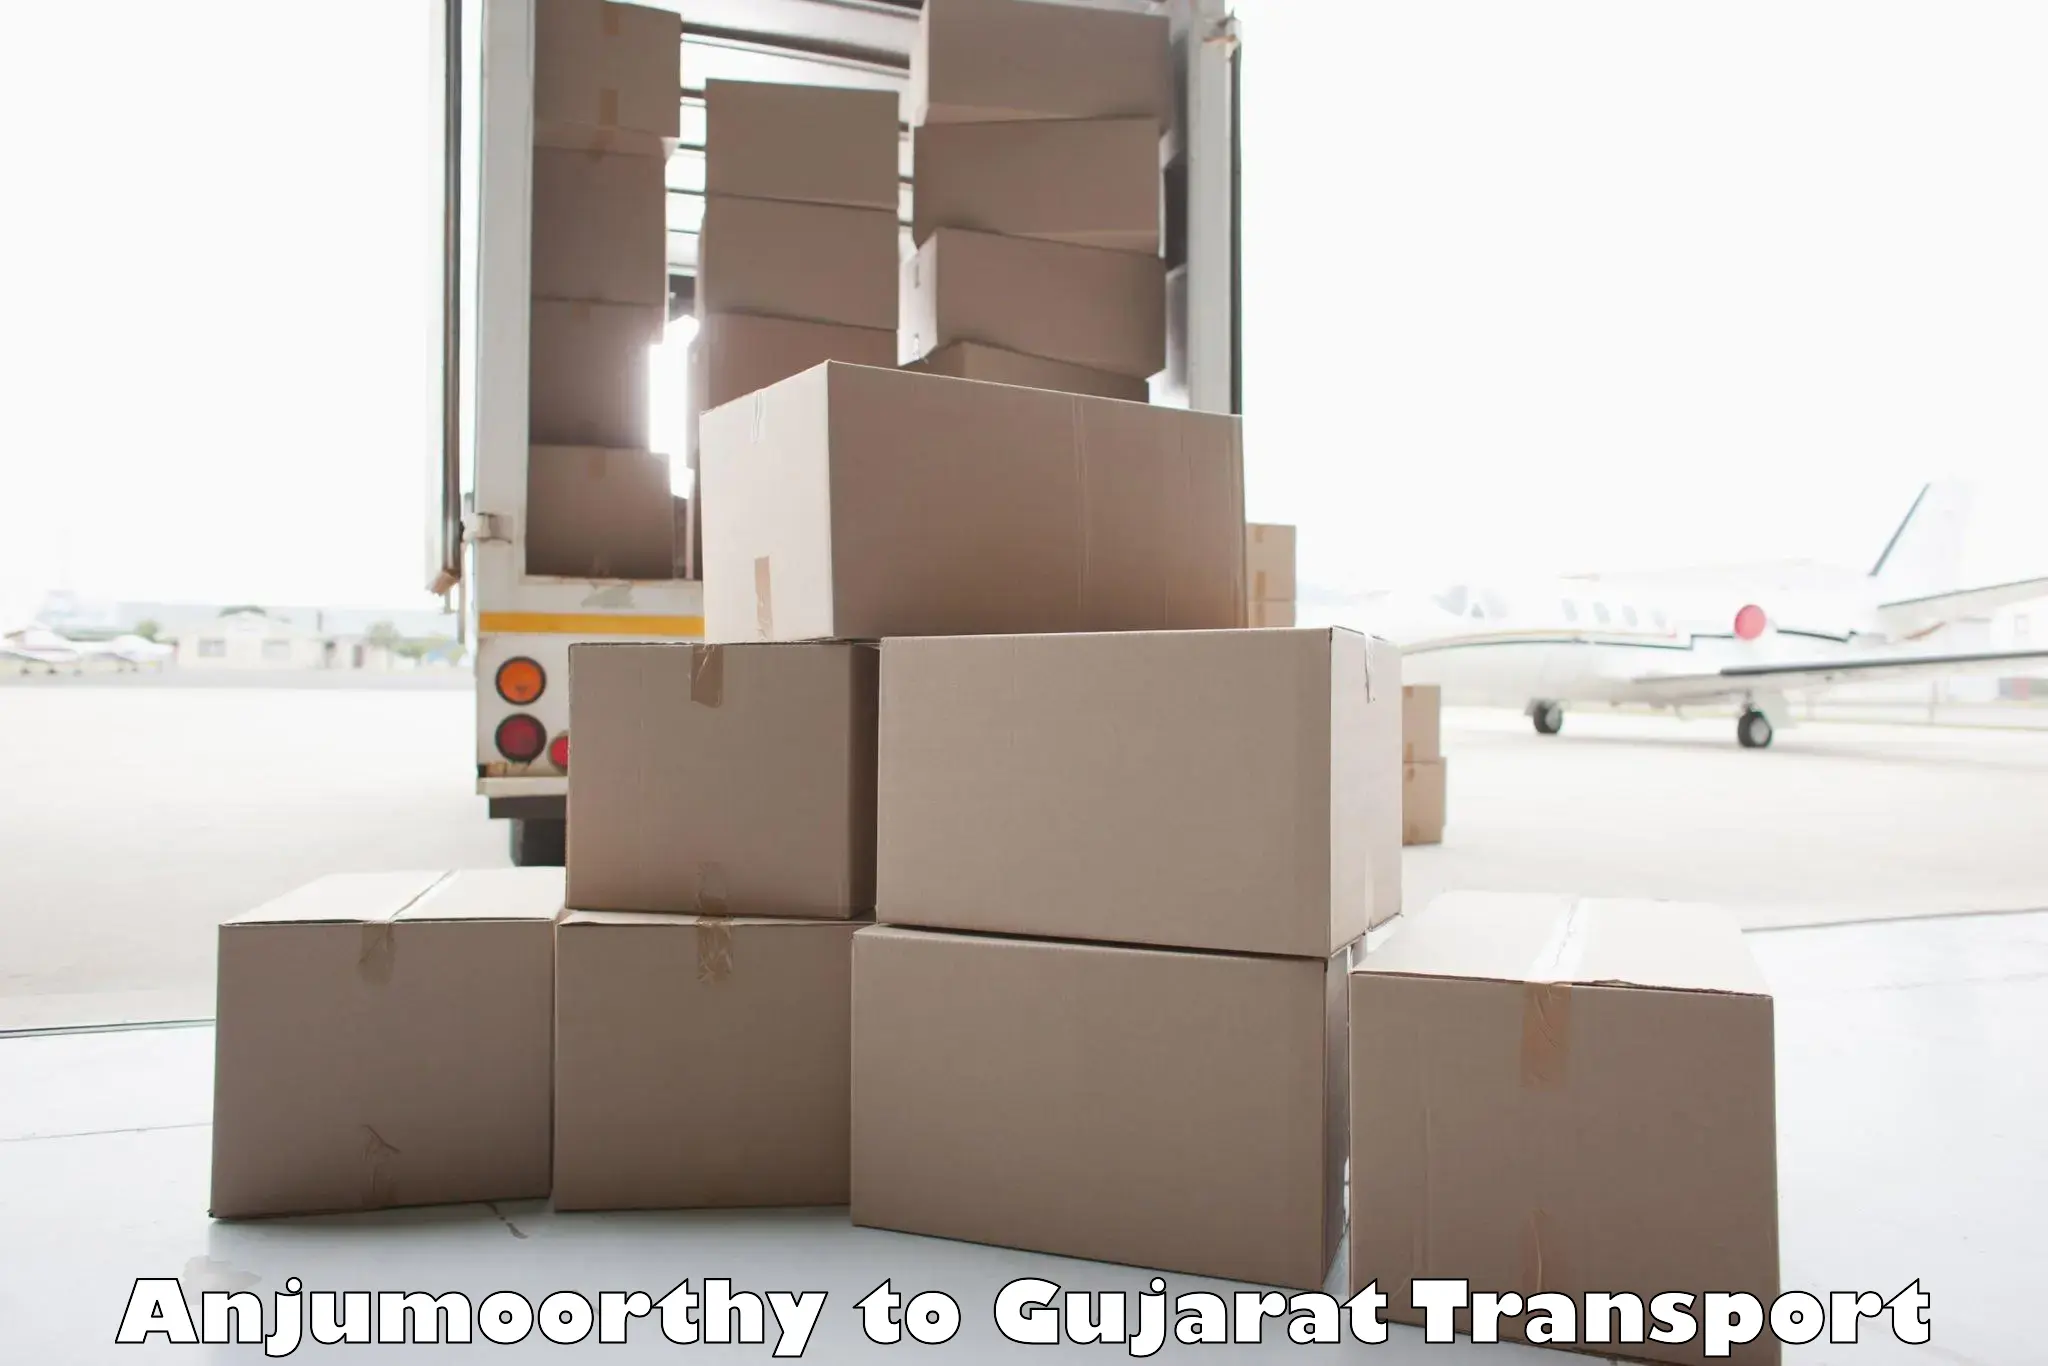 Goods delivery service in Anjumoorthy to Ahmedabad